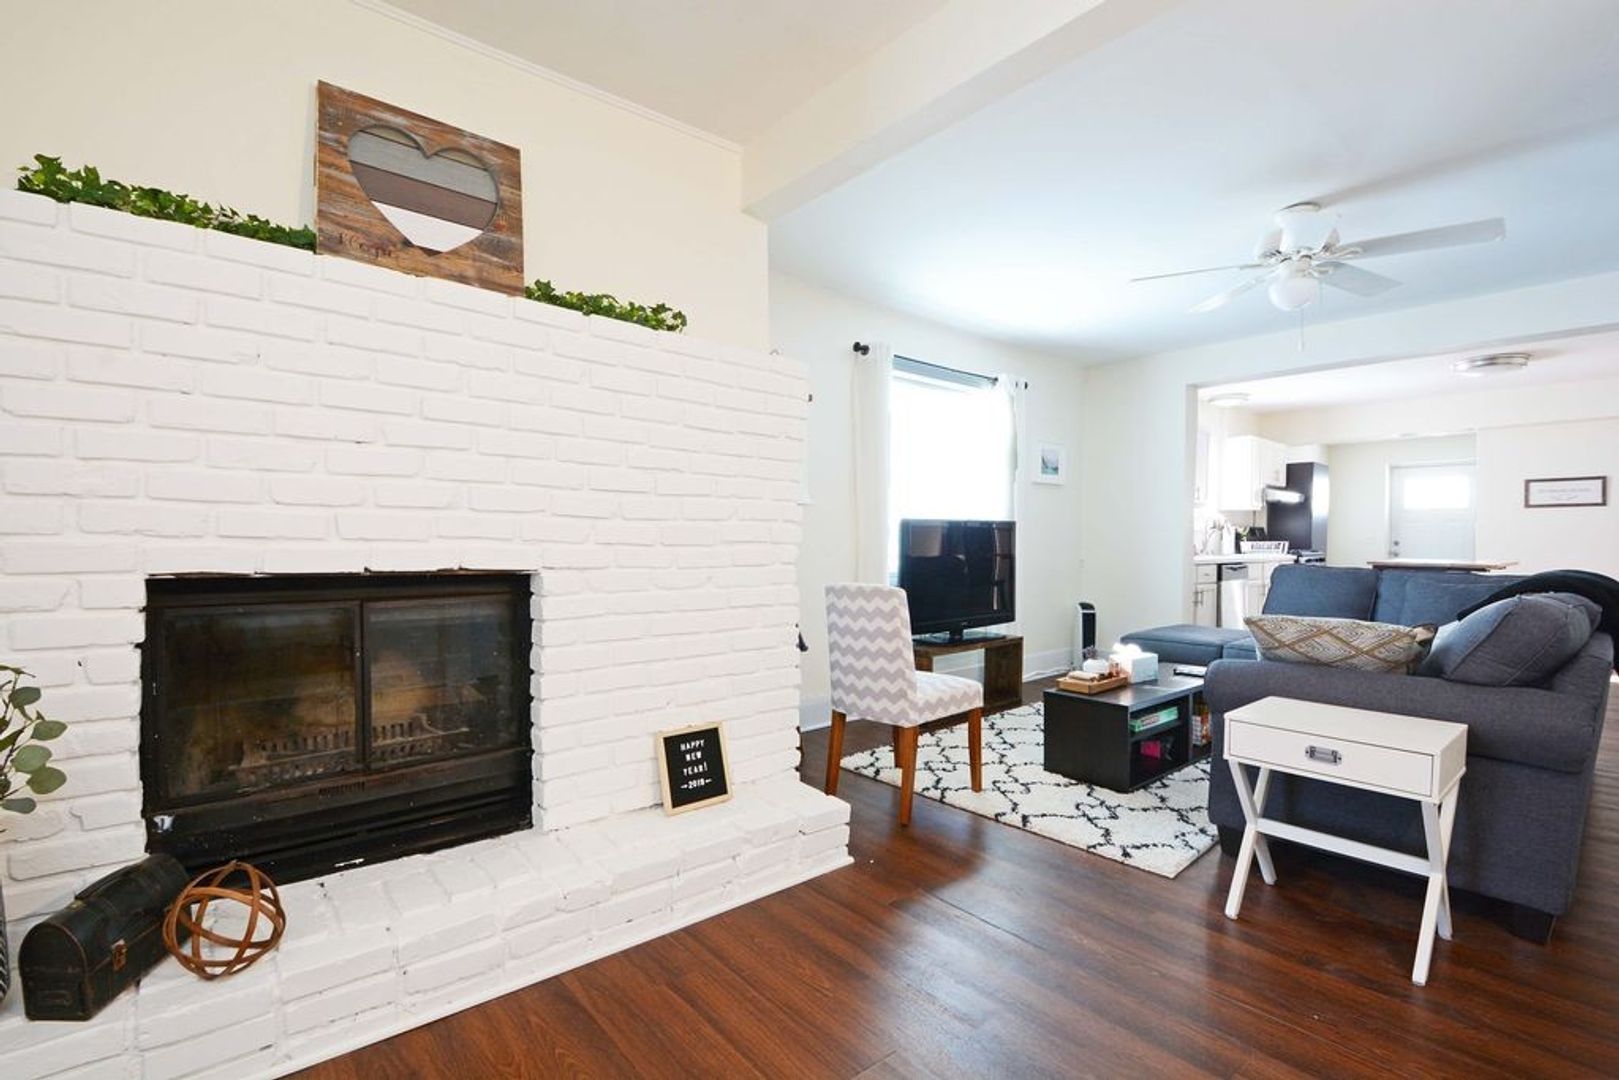 Completely Remodeled Duplex, Pet-Friendly in Northeast Minneapolis Arts District! 3 beds 1 bath!